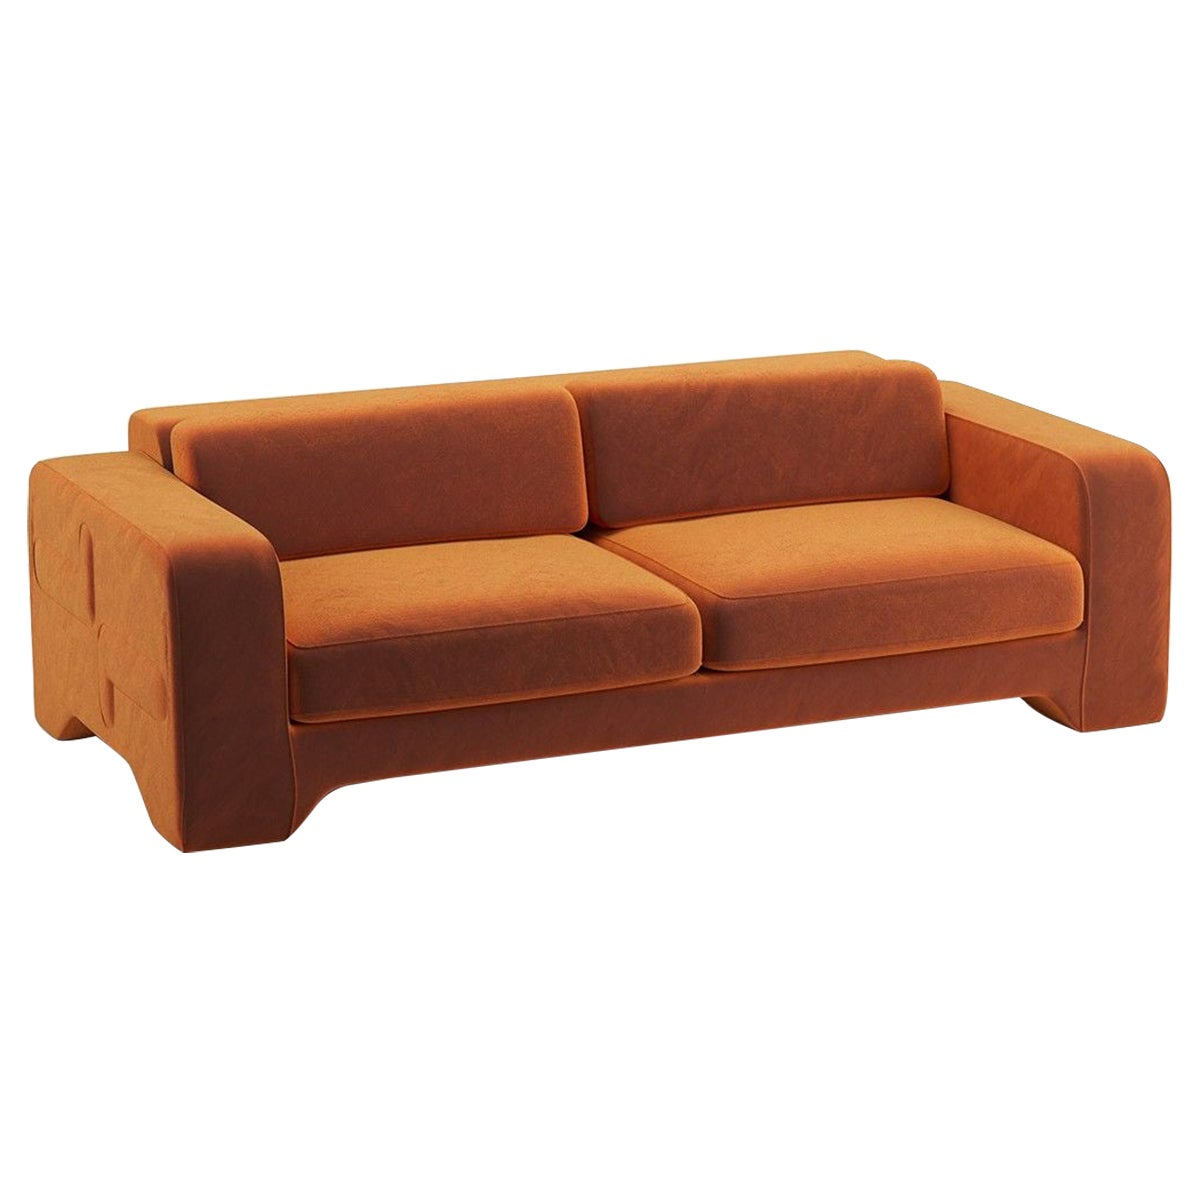 Popus Editions Giovanna 3 Seater Sofa in Amber Como Velvet Upholstery